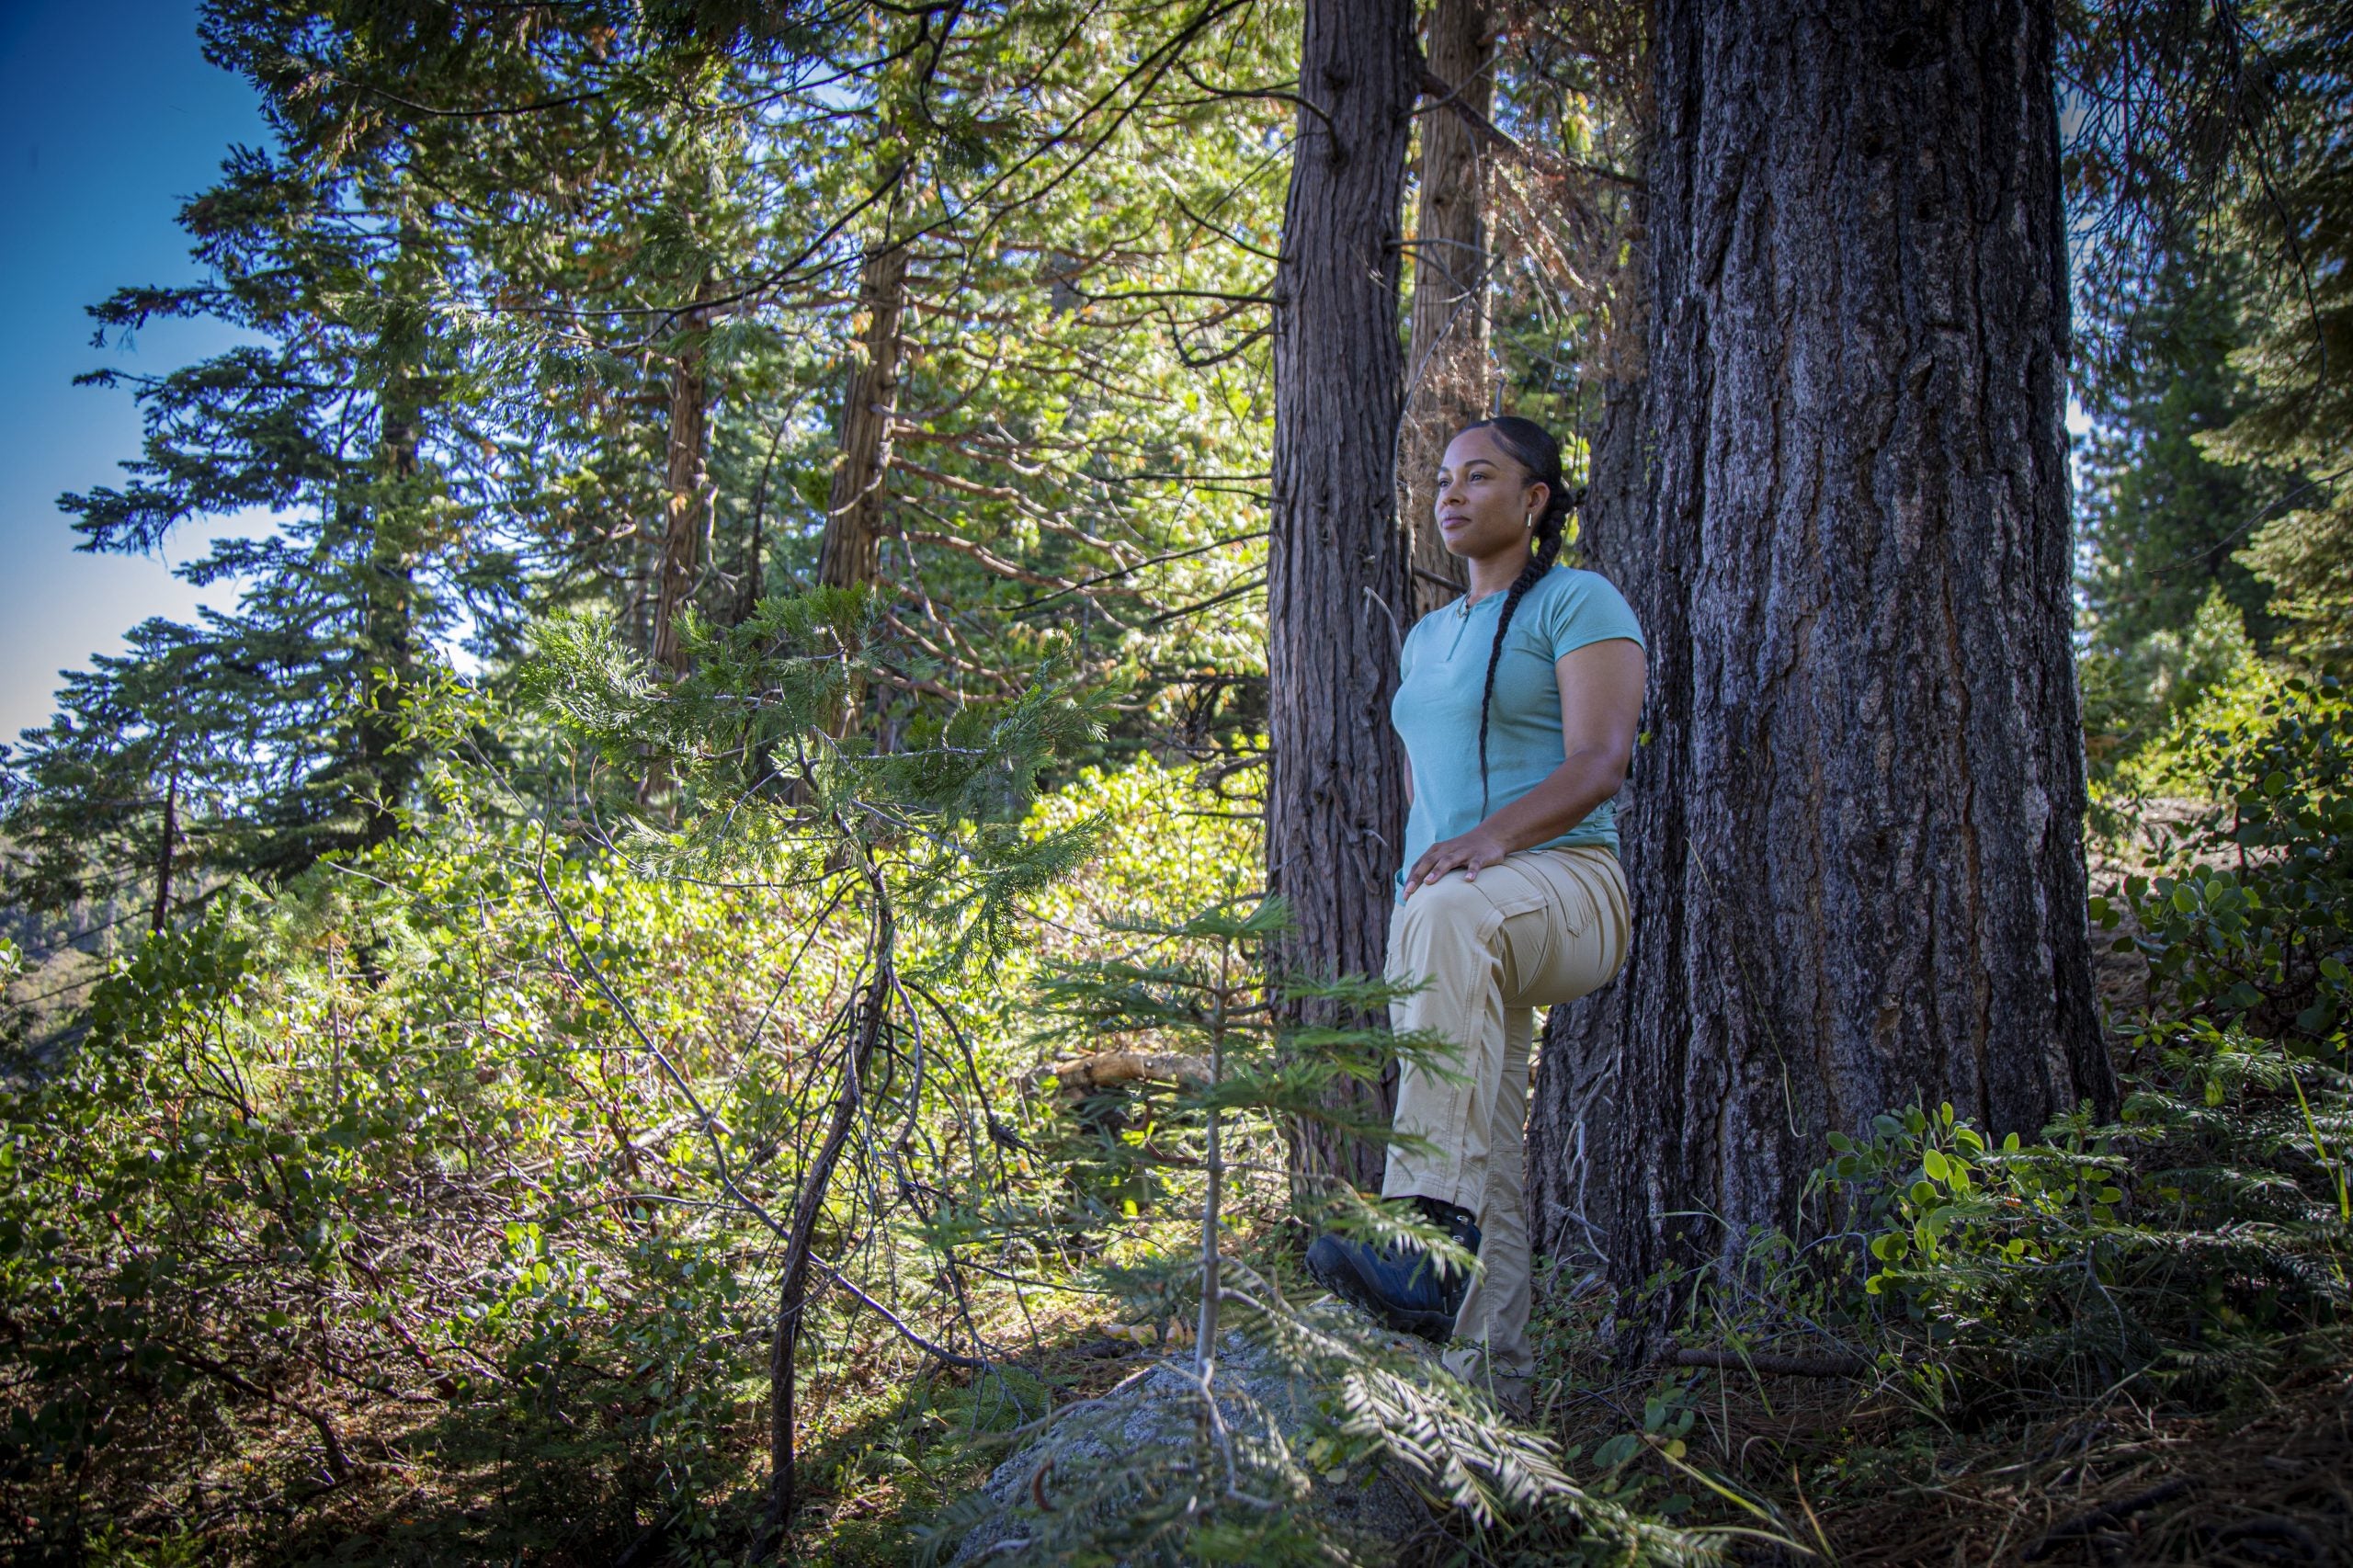 California’s First And Only Black-Led Land Trust Acquires 650 Acres, Prepares To Break Ground